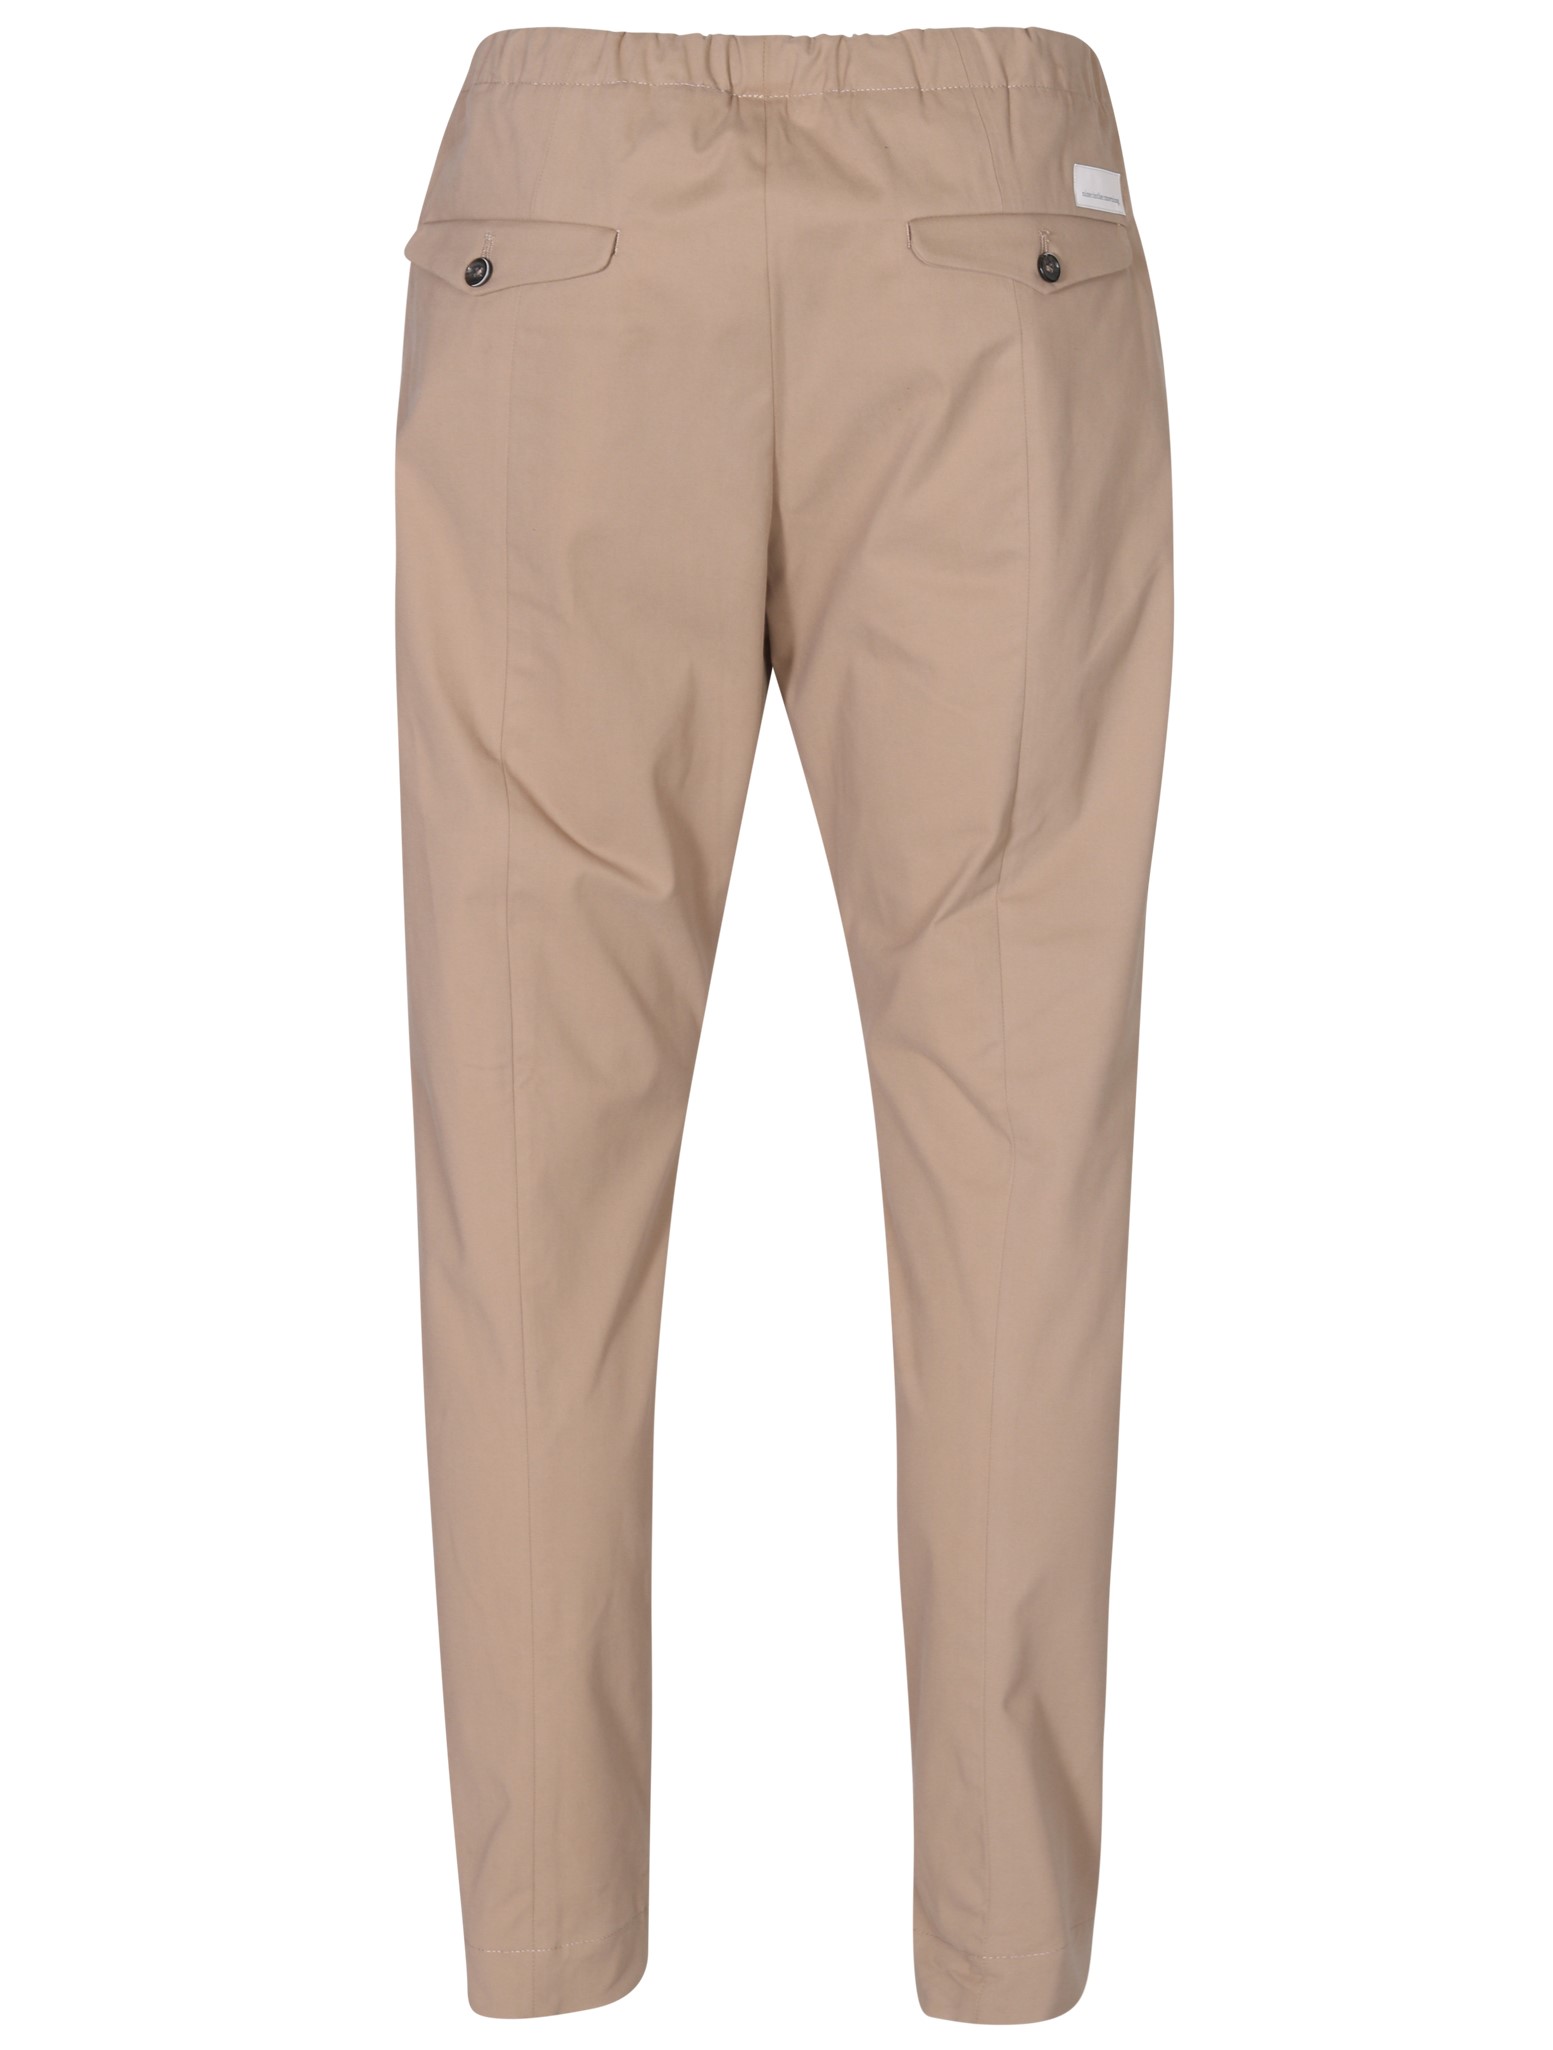 NINE:INTHE:MORNING Mirco Carrot Cotton Stretch Pant in Beige 46